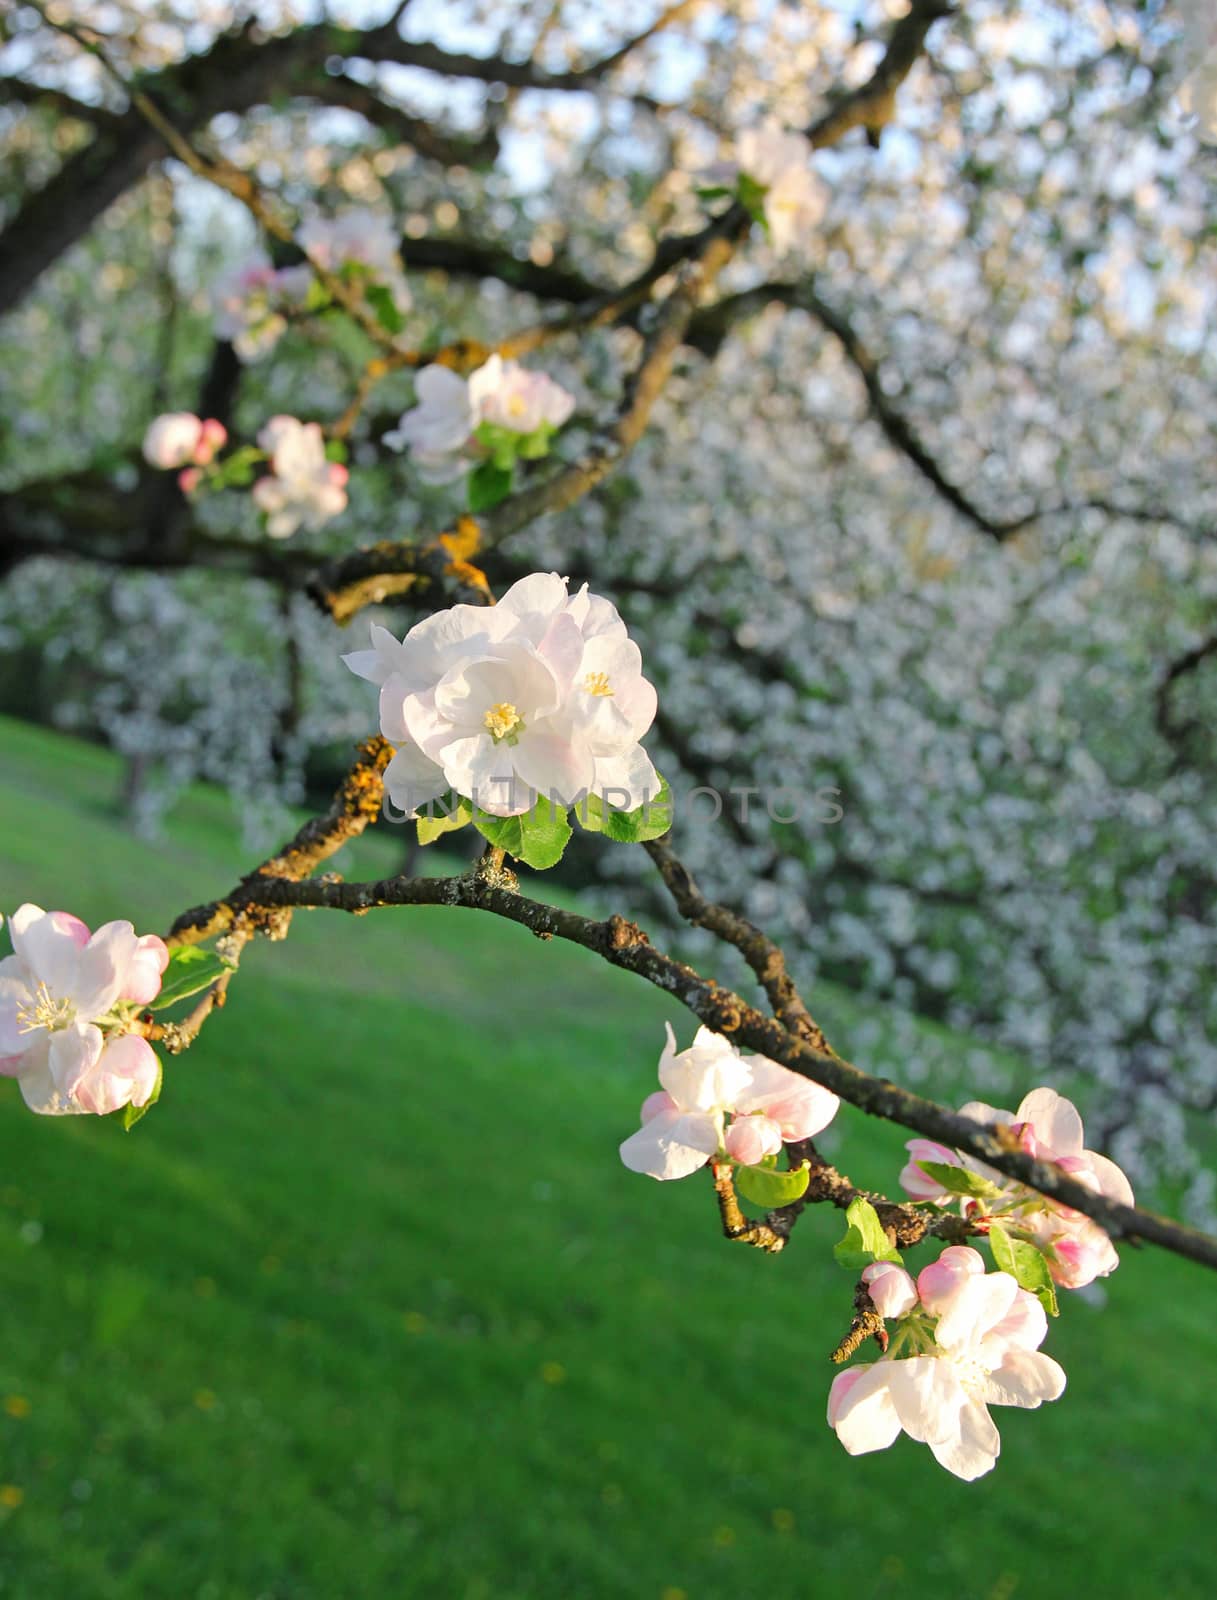 Apple blossoms in spring at sunset can use as background